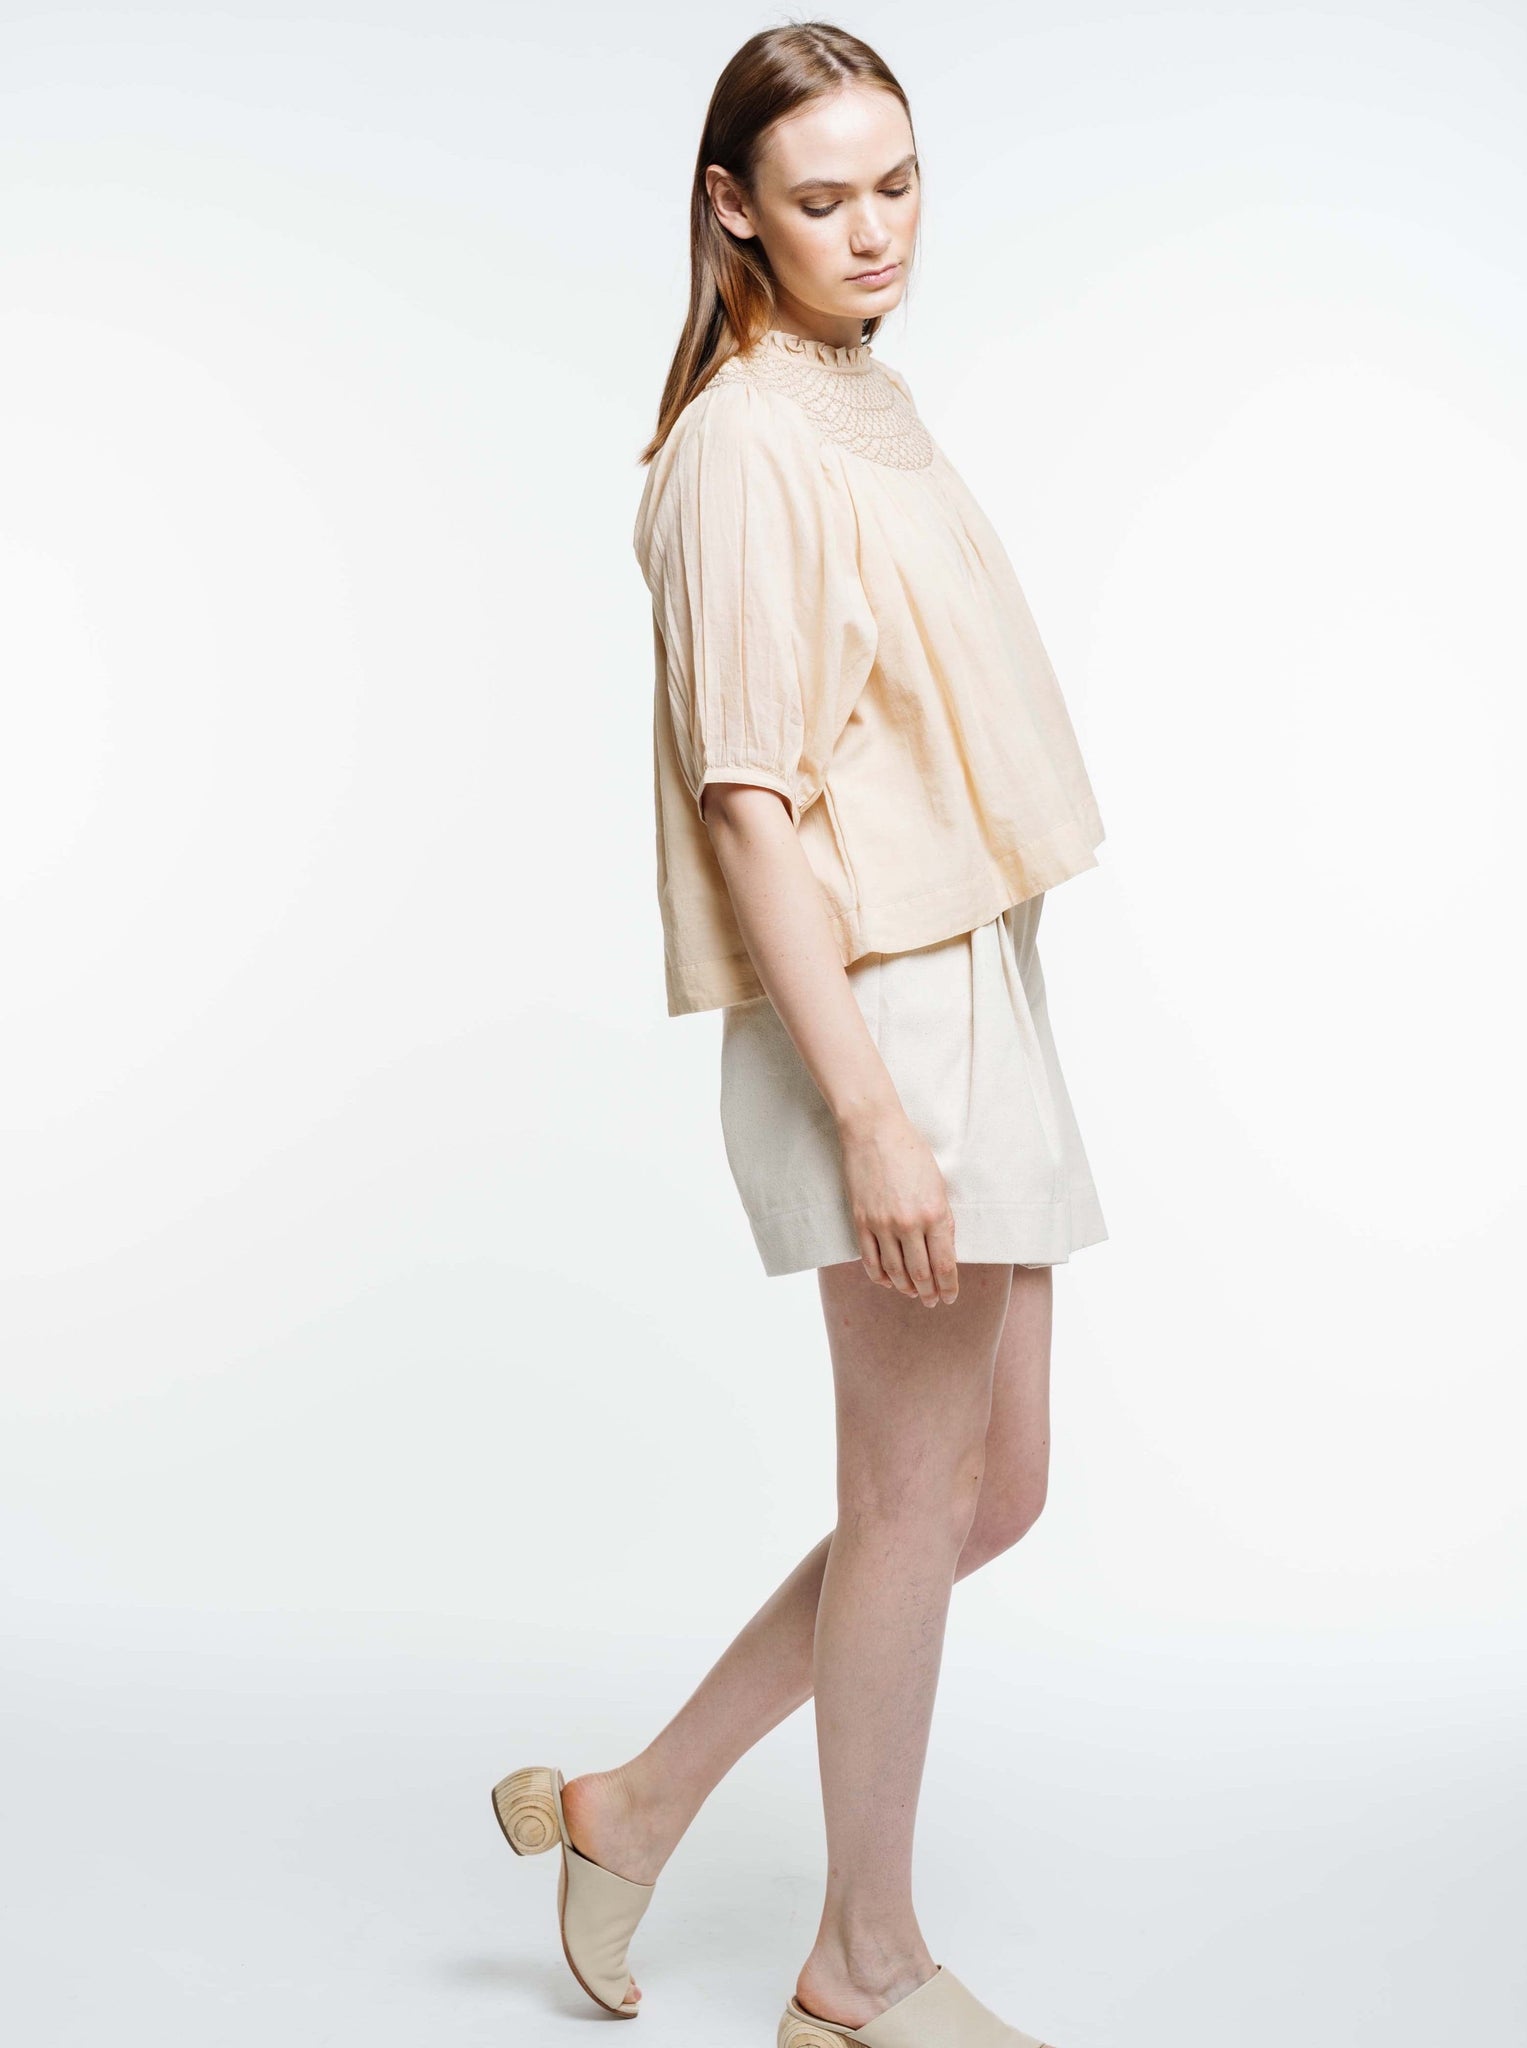 The model is wearing an organic cotton Lena Top - Acacia Wood.